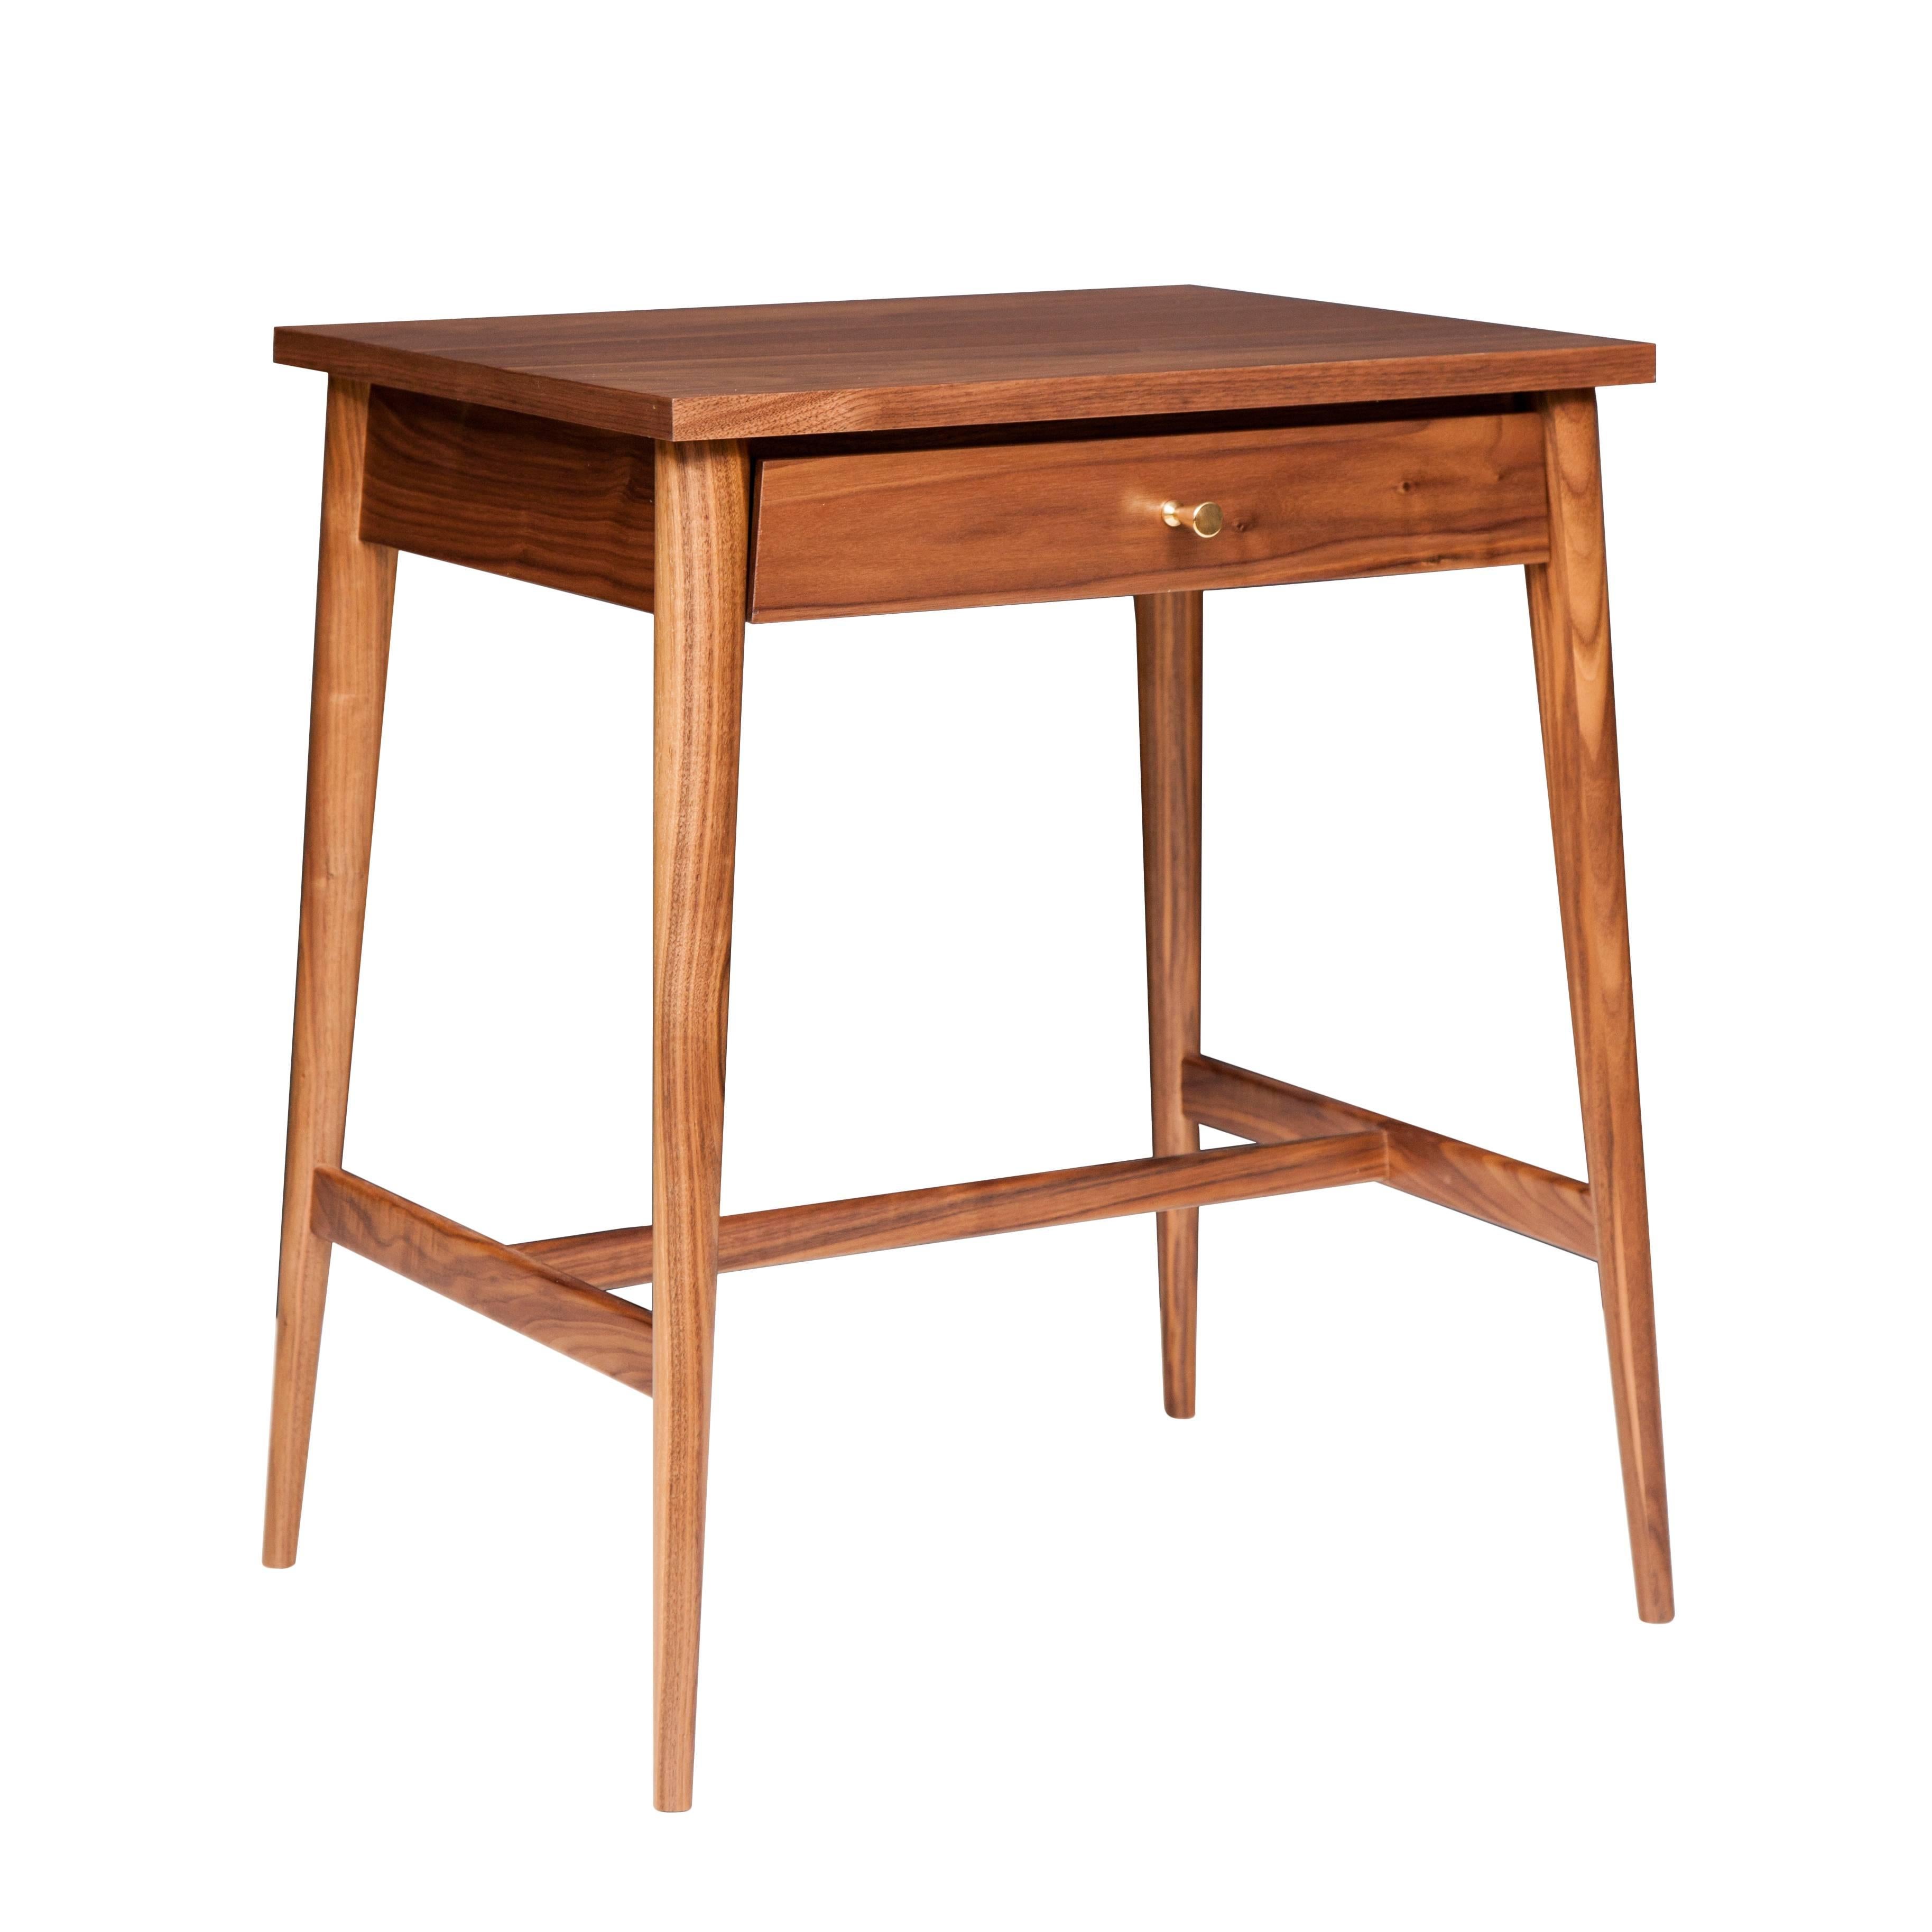 Mn originals walnut nightstand newly remade from Paul McCobb’s Planner Group line. Walnut construction, all handmade to exact specifications of original 1950s production. Single top drawer with solid brass hardware. Please contact us about custom